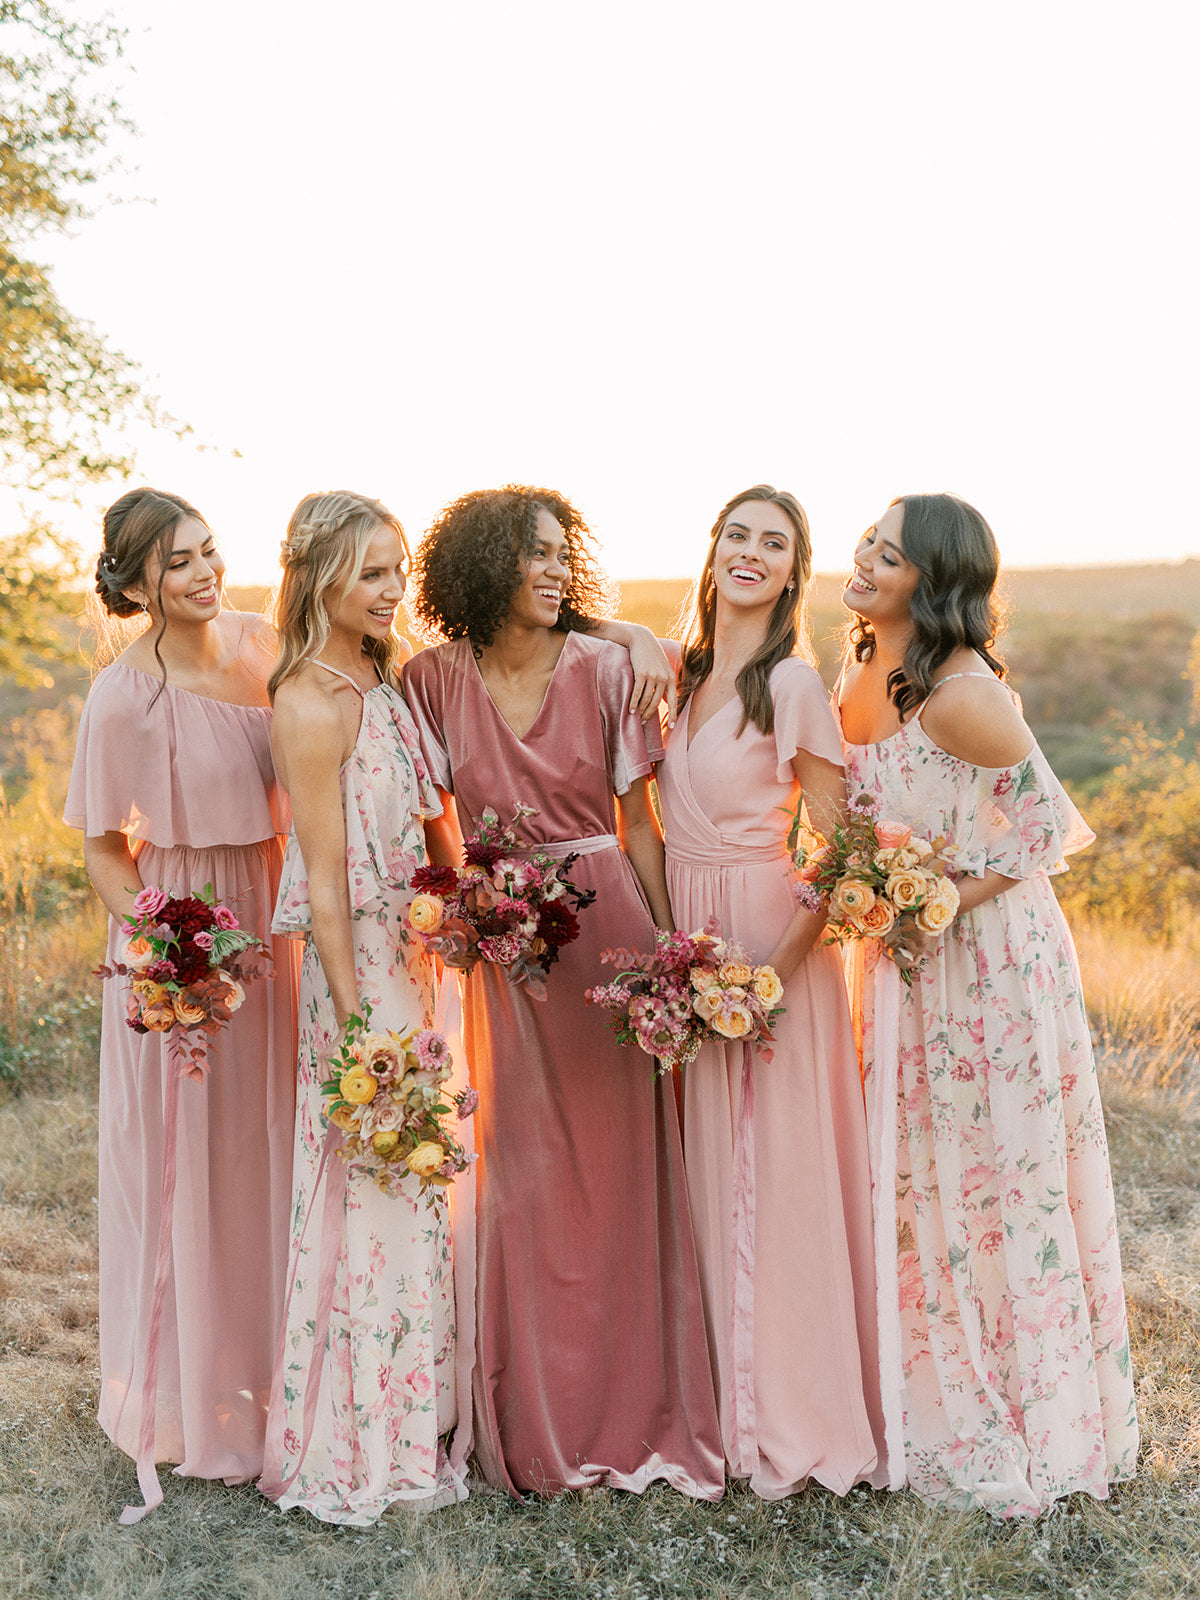 Mix and Match! 25 Beautiful Mismatched Bridesmaid Dresses Your Girls Will  Love! - Praise Wedding